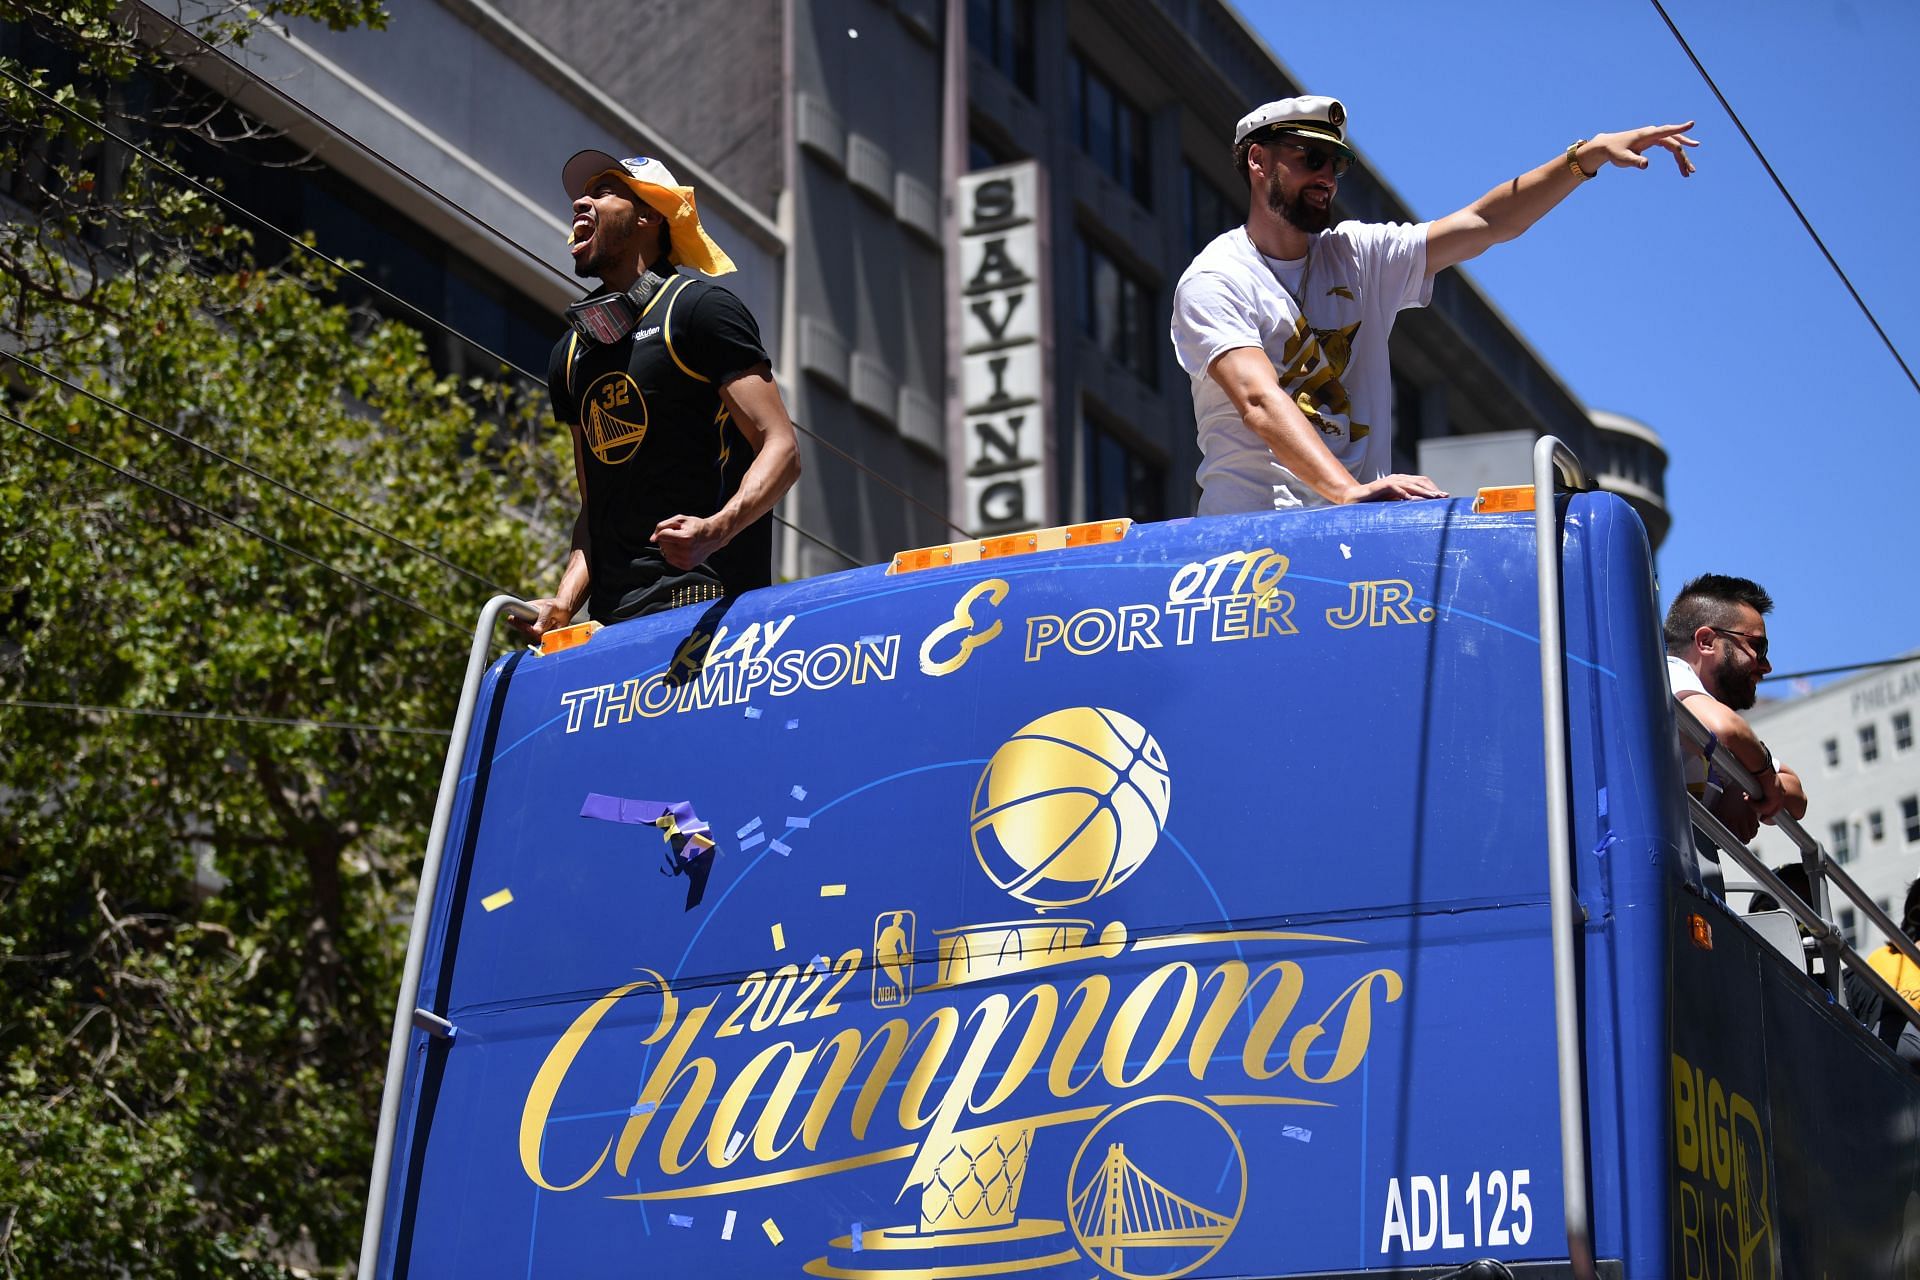 Warriors Player Klay Thompson Knocks Over Fan at Championship Parade